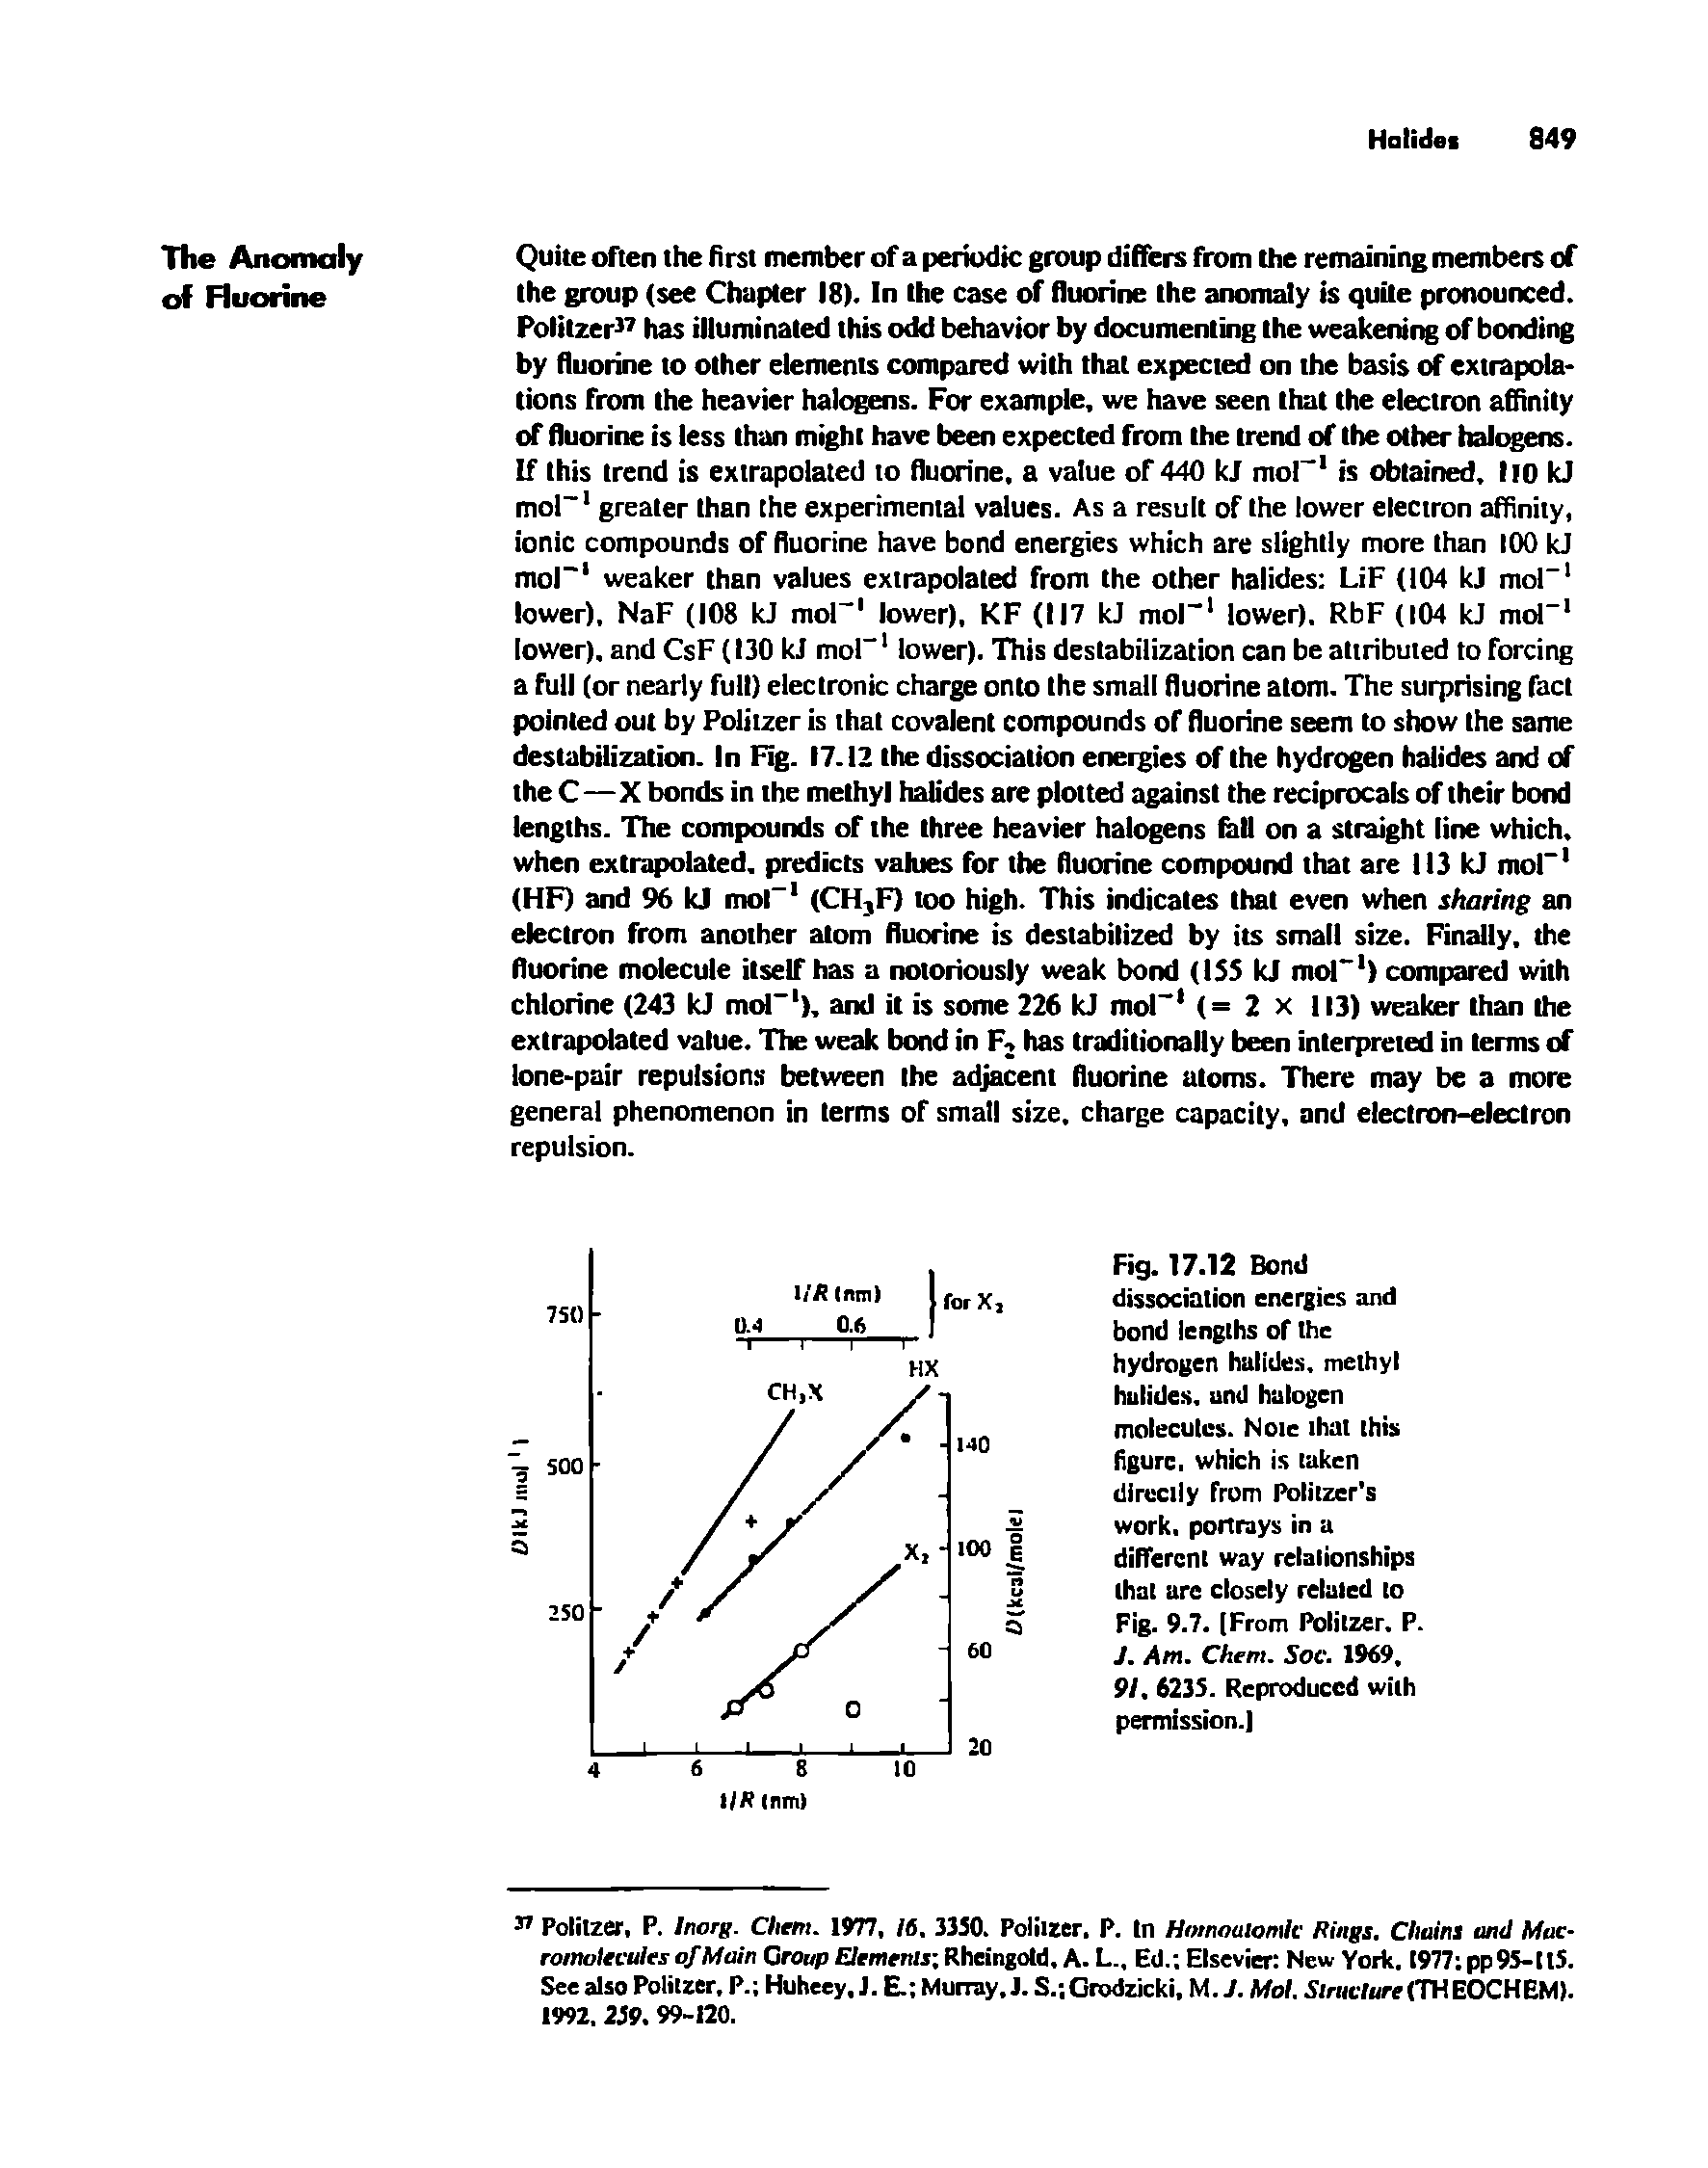 Fig. 17.12 Bond dissociation eneigies and bond lengths of the hydrogen halides, methyl halides, and halogen molecules. Note that this figure, which is taken directly from Politzer s work, portrays in a difiTerenl way rdalionships that are closely relaled to Fig. 9.7. [From Folitzer. P. J. Am. Chem. Soc. 1969. 91.6235. Reproduced with pemiission. ...